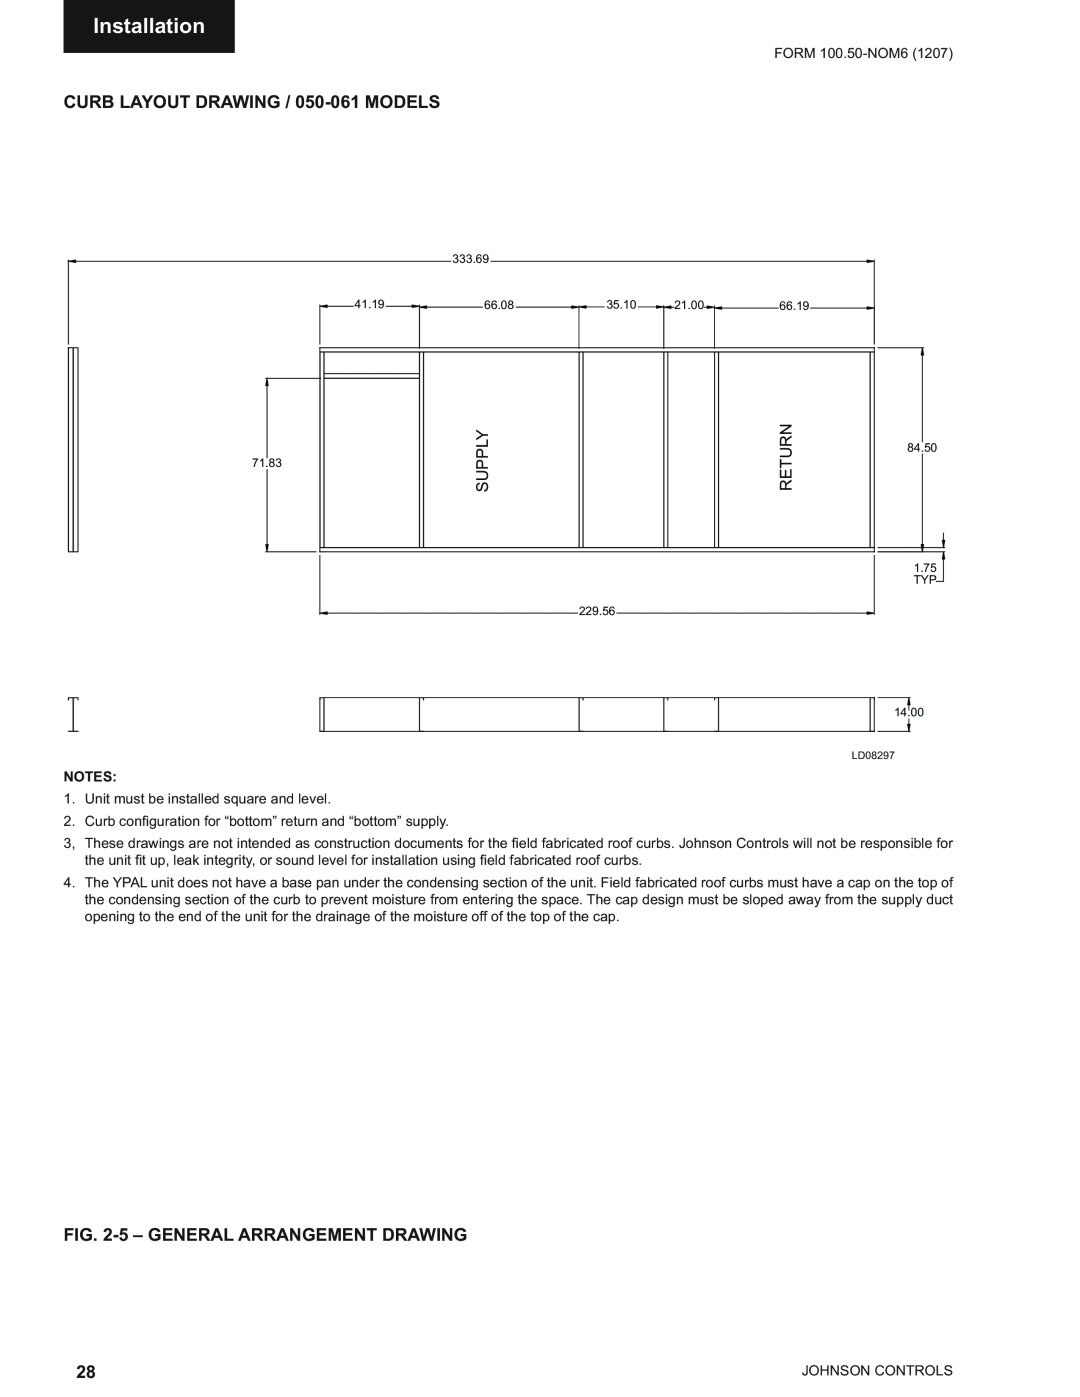 York YPAL 061 manual Installation, CURB LAYOUT DRAWING / 050-061 MODELS, 5 - GENERAL ARRANGEMENT DRAWING, Supply, Return 